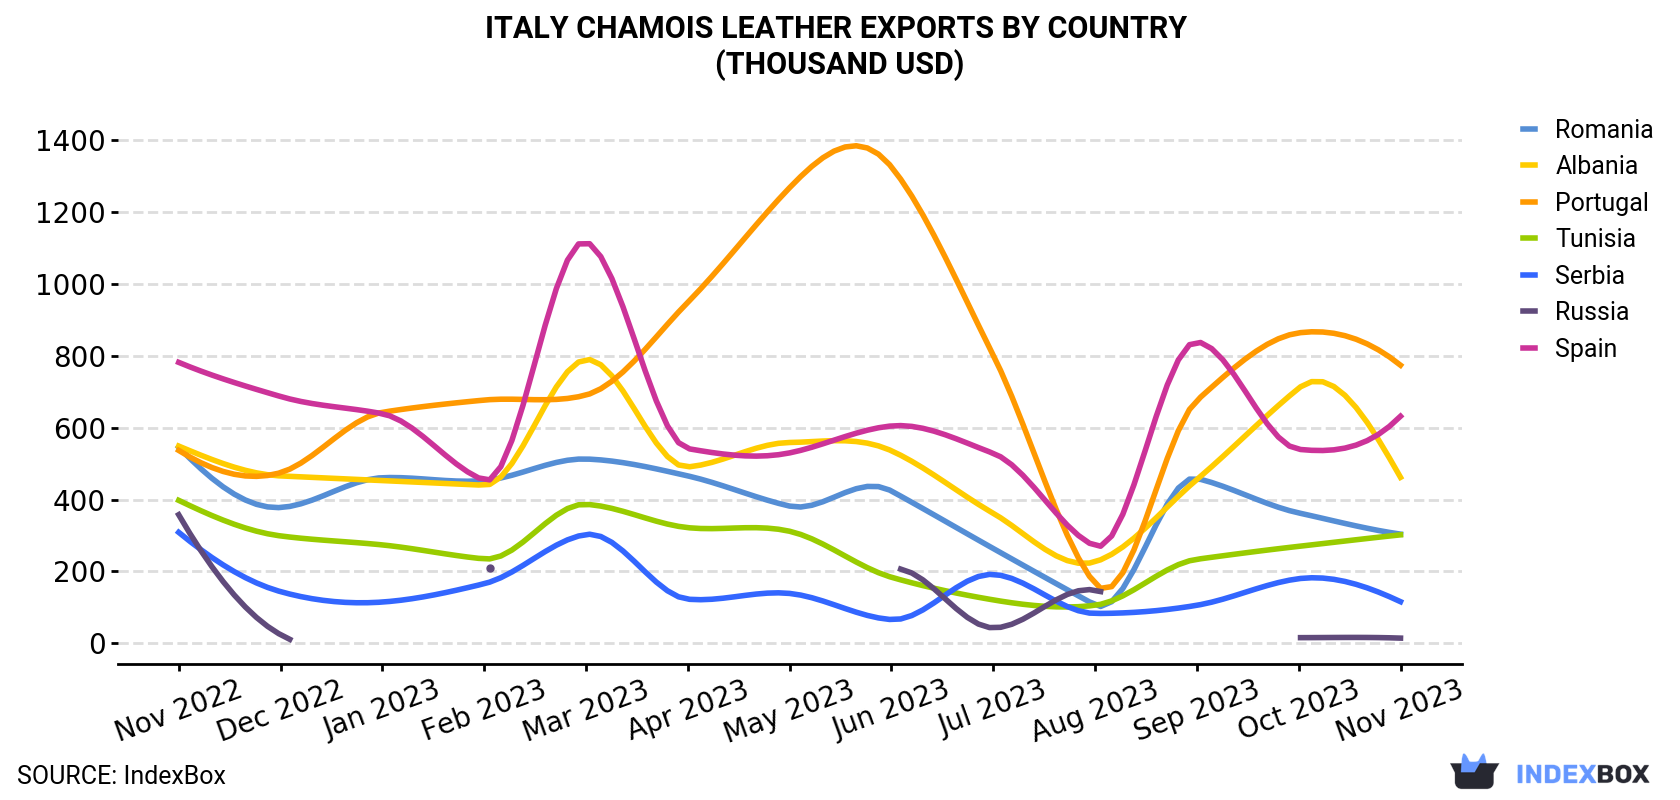 Italy Chamois Leather Exports By Country (Thousand USD)